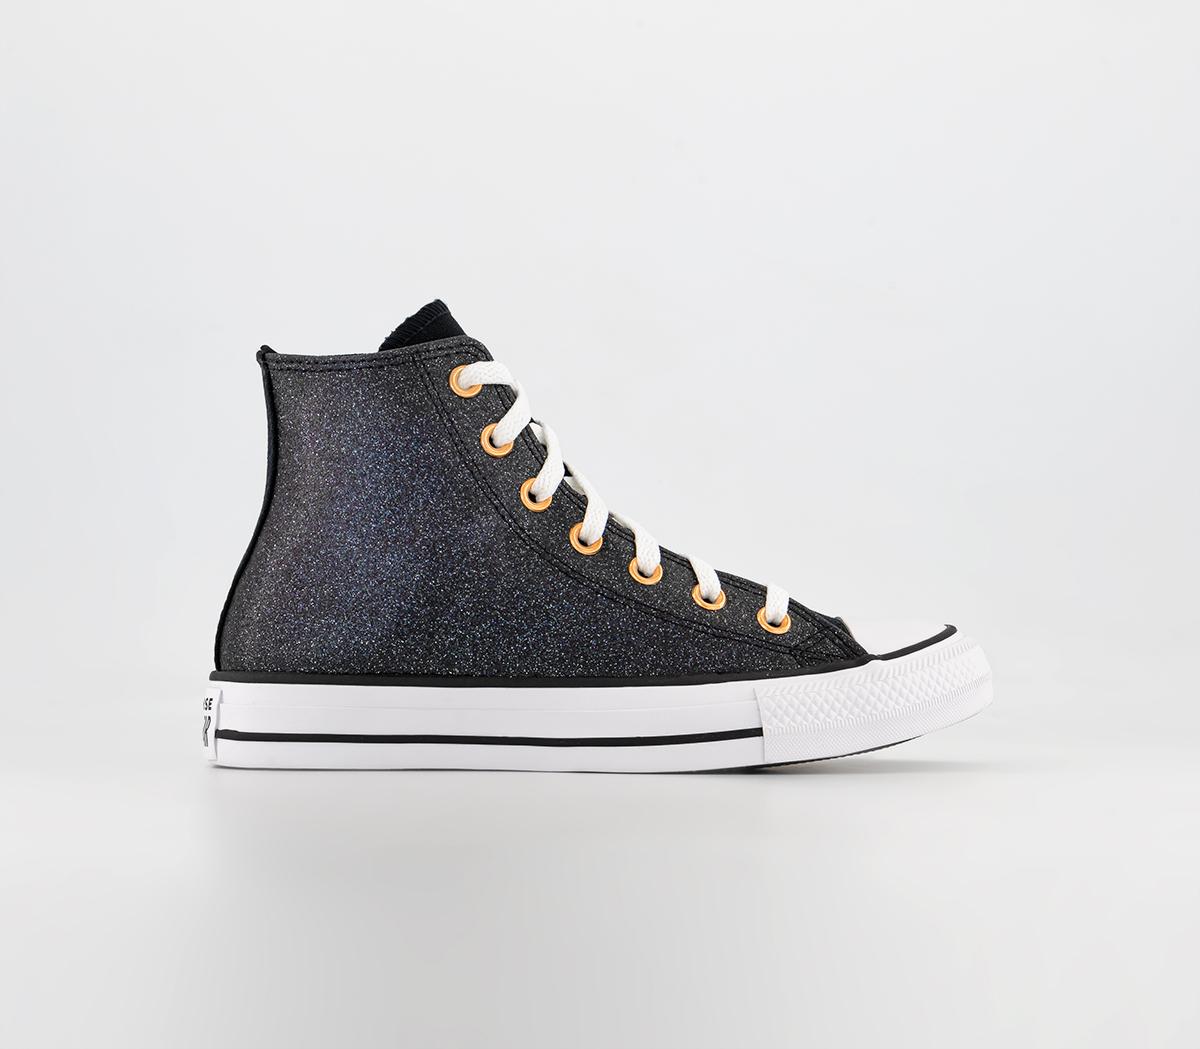 absolutte tromme dukke Odd Sizes - Womens Converse All Star Hi Black White Copper - UK Sizes –  OFFCUTS SHOES by OFFICE